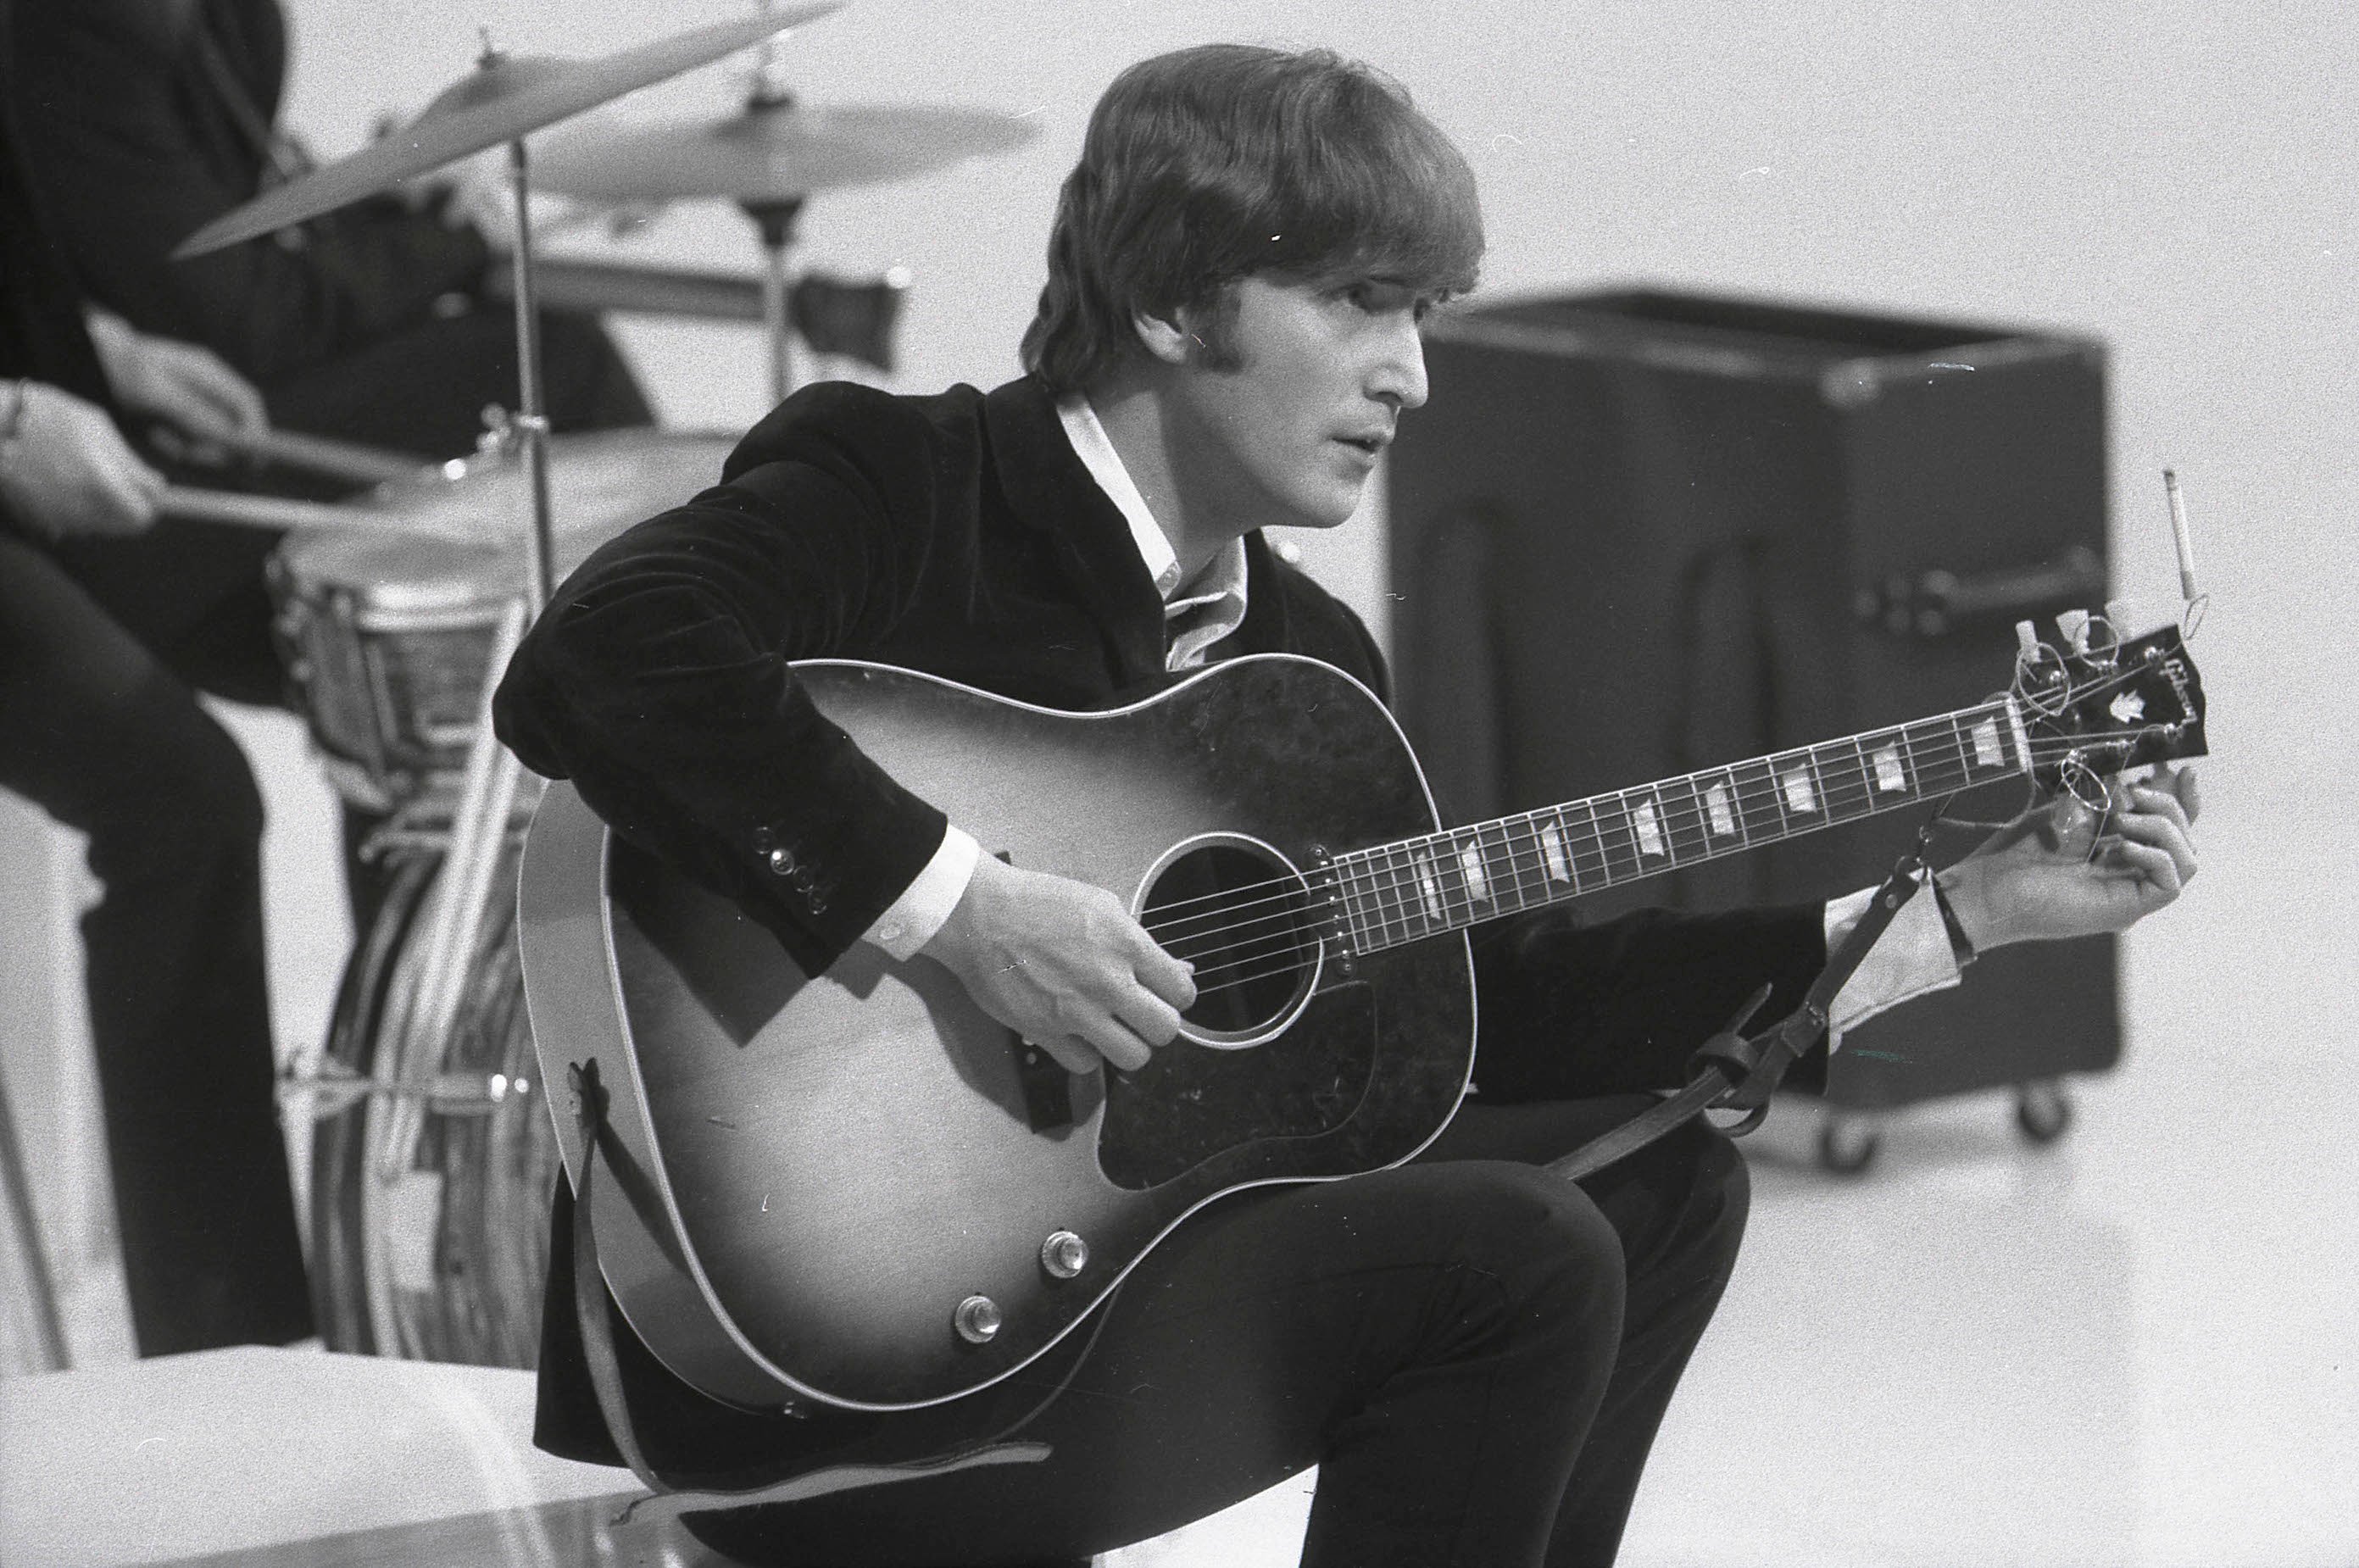 John Lennon tuning his guitar during the filming of 'A Hard Day's Night'